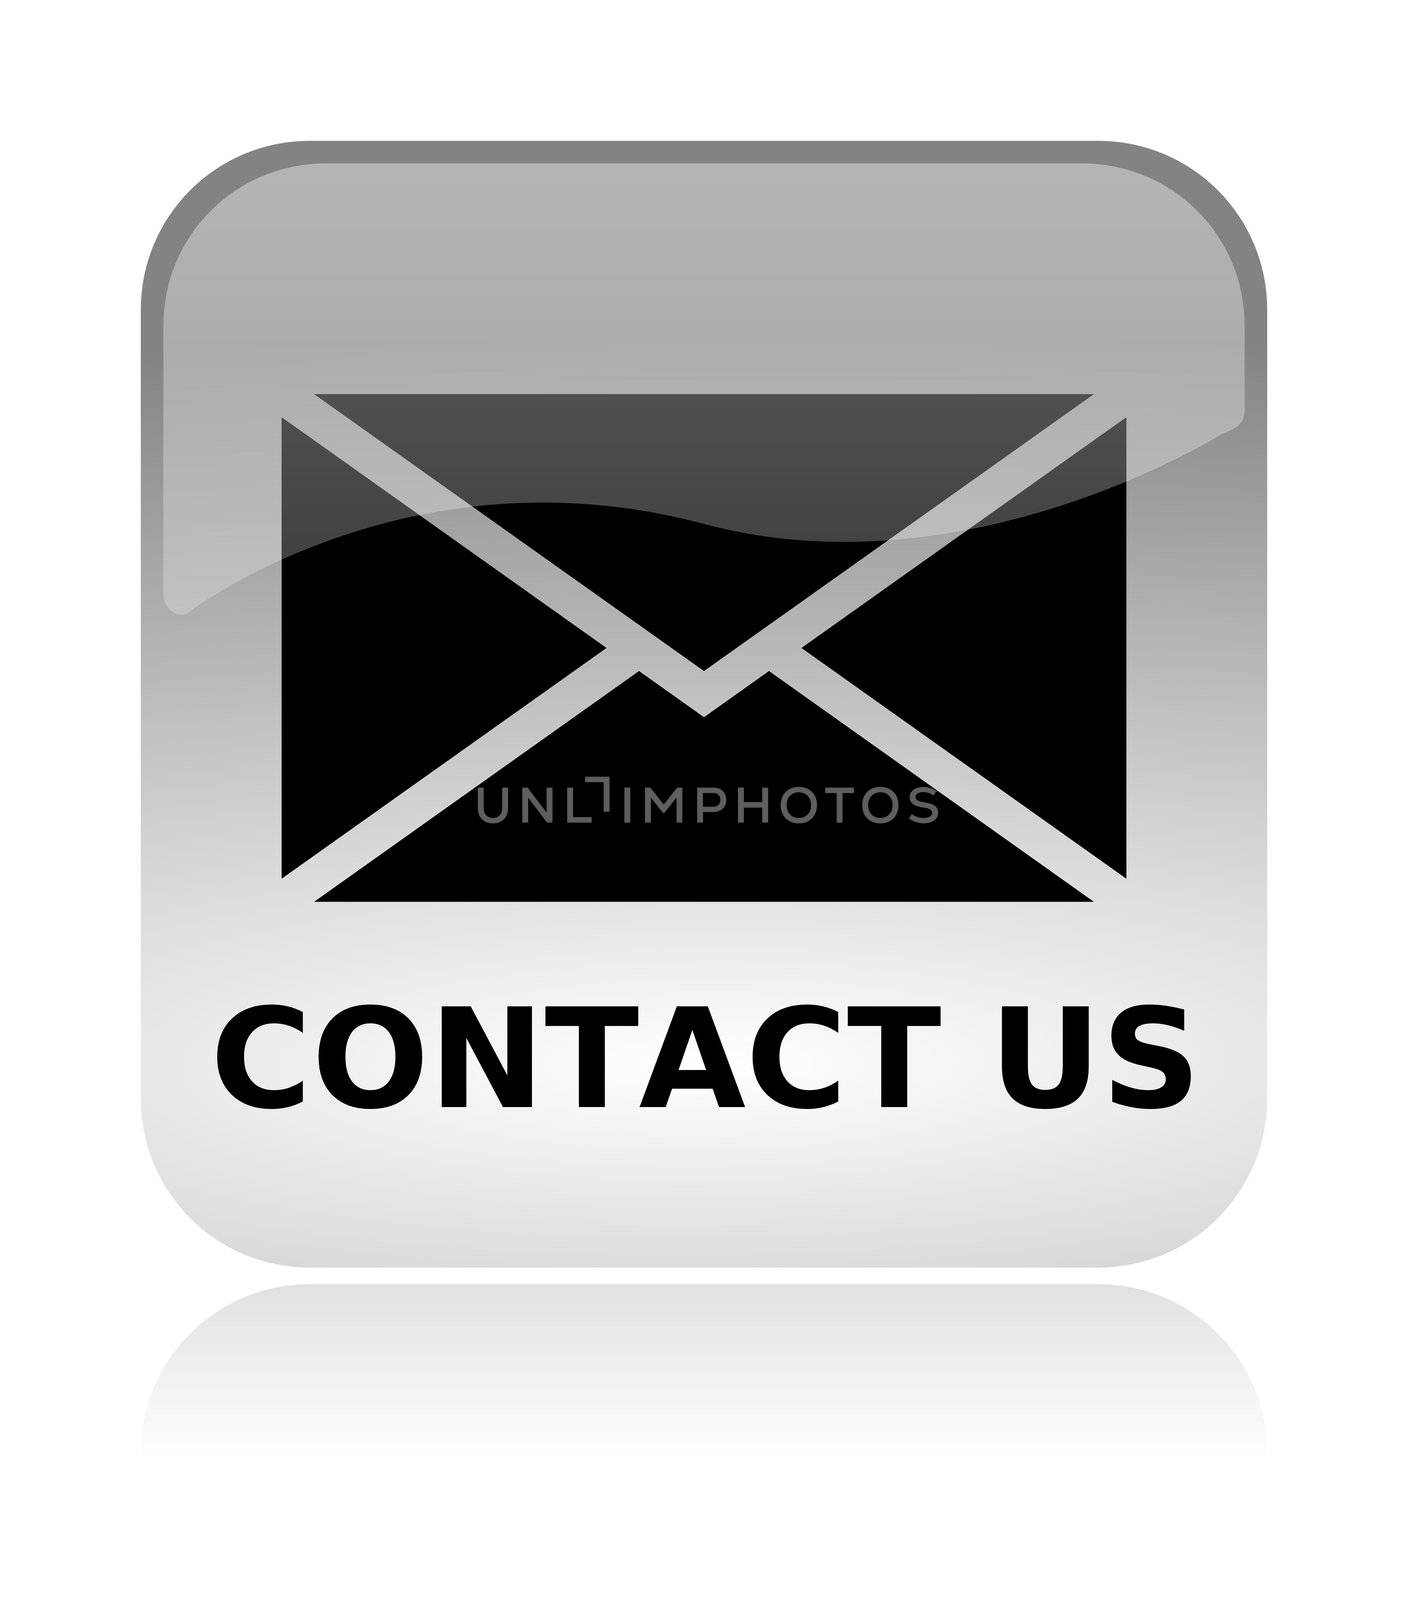 Contact us email web interface icon by make